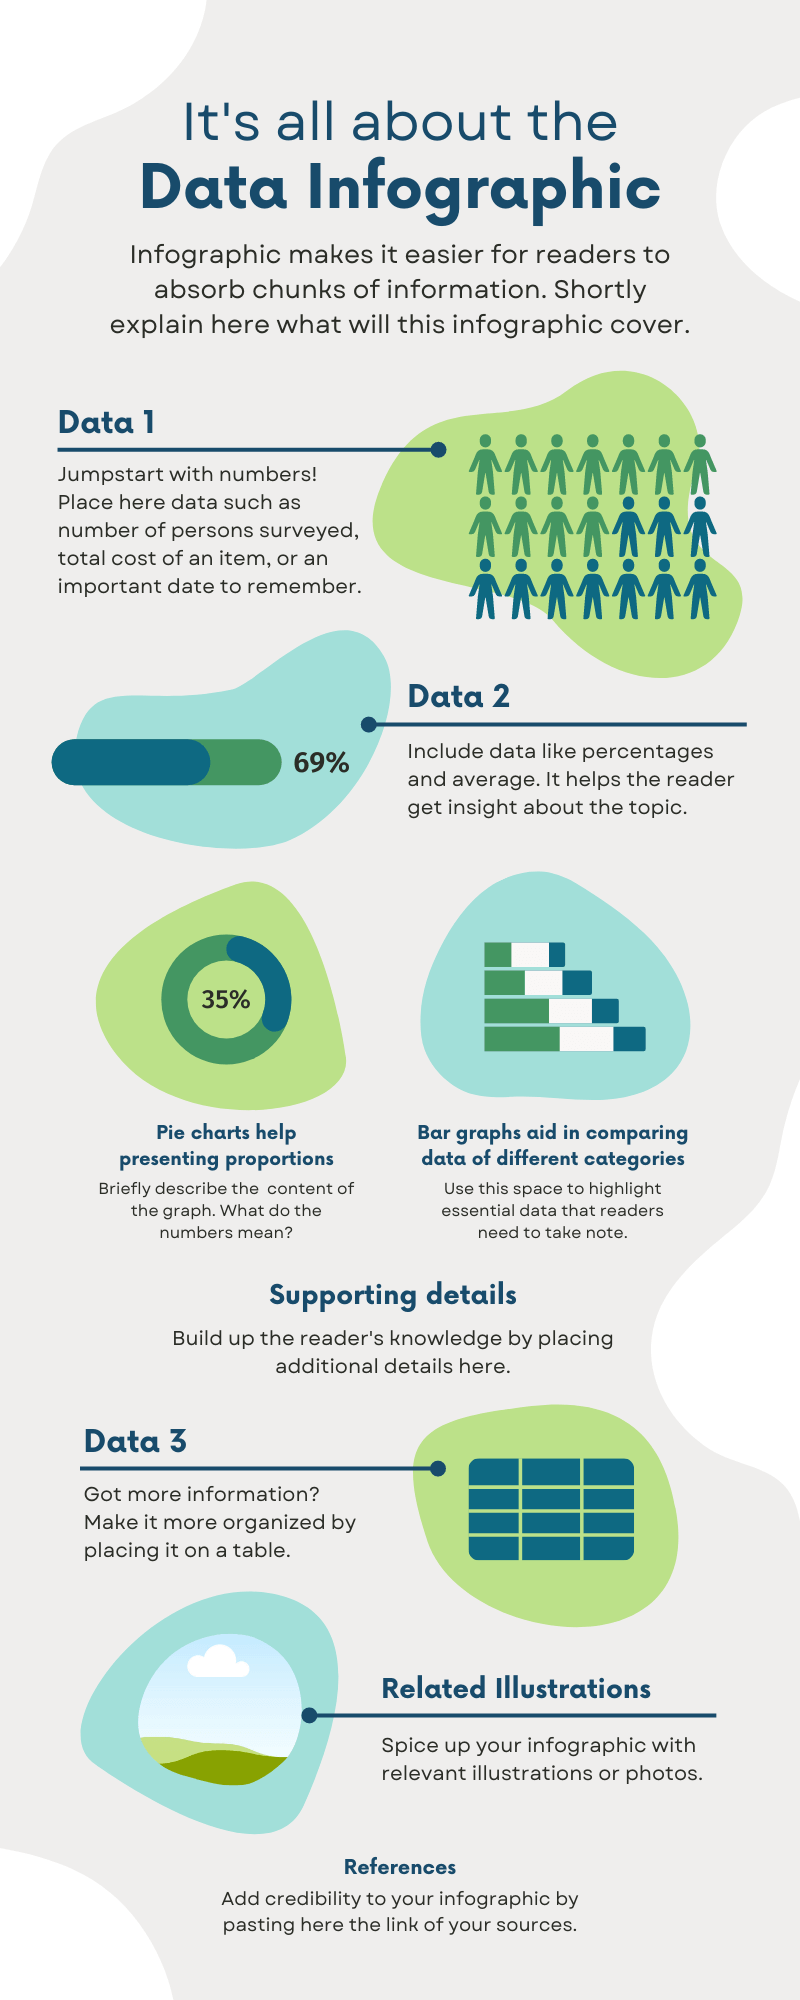 Blue Green and Gray Soft and Rounded Data Infographic